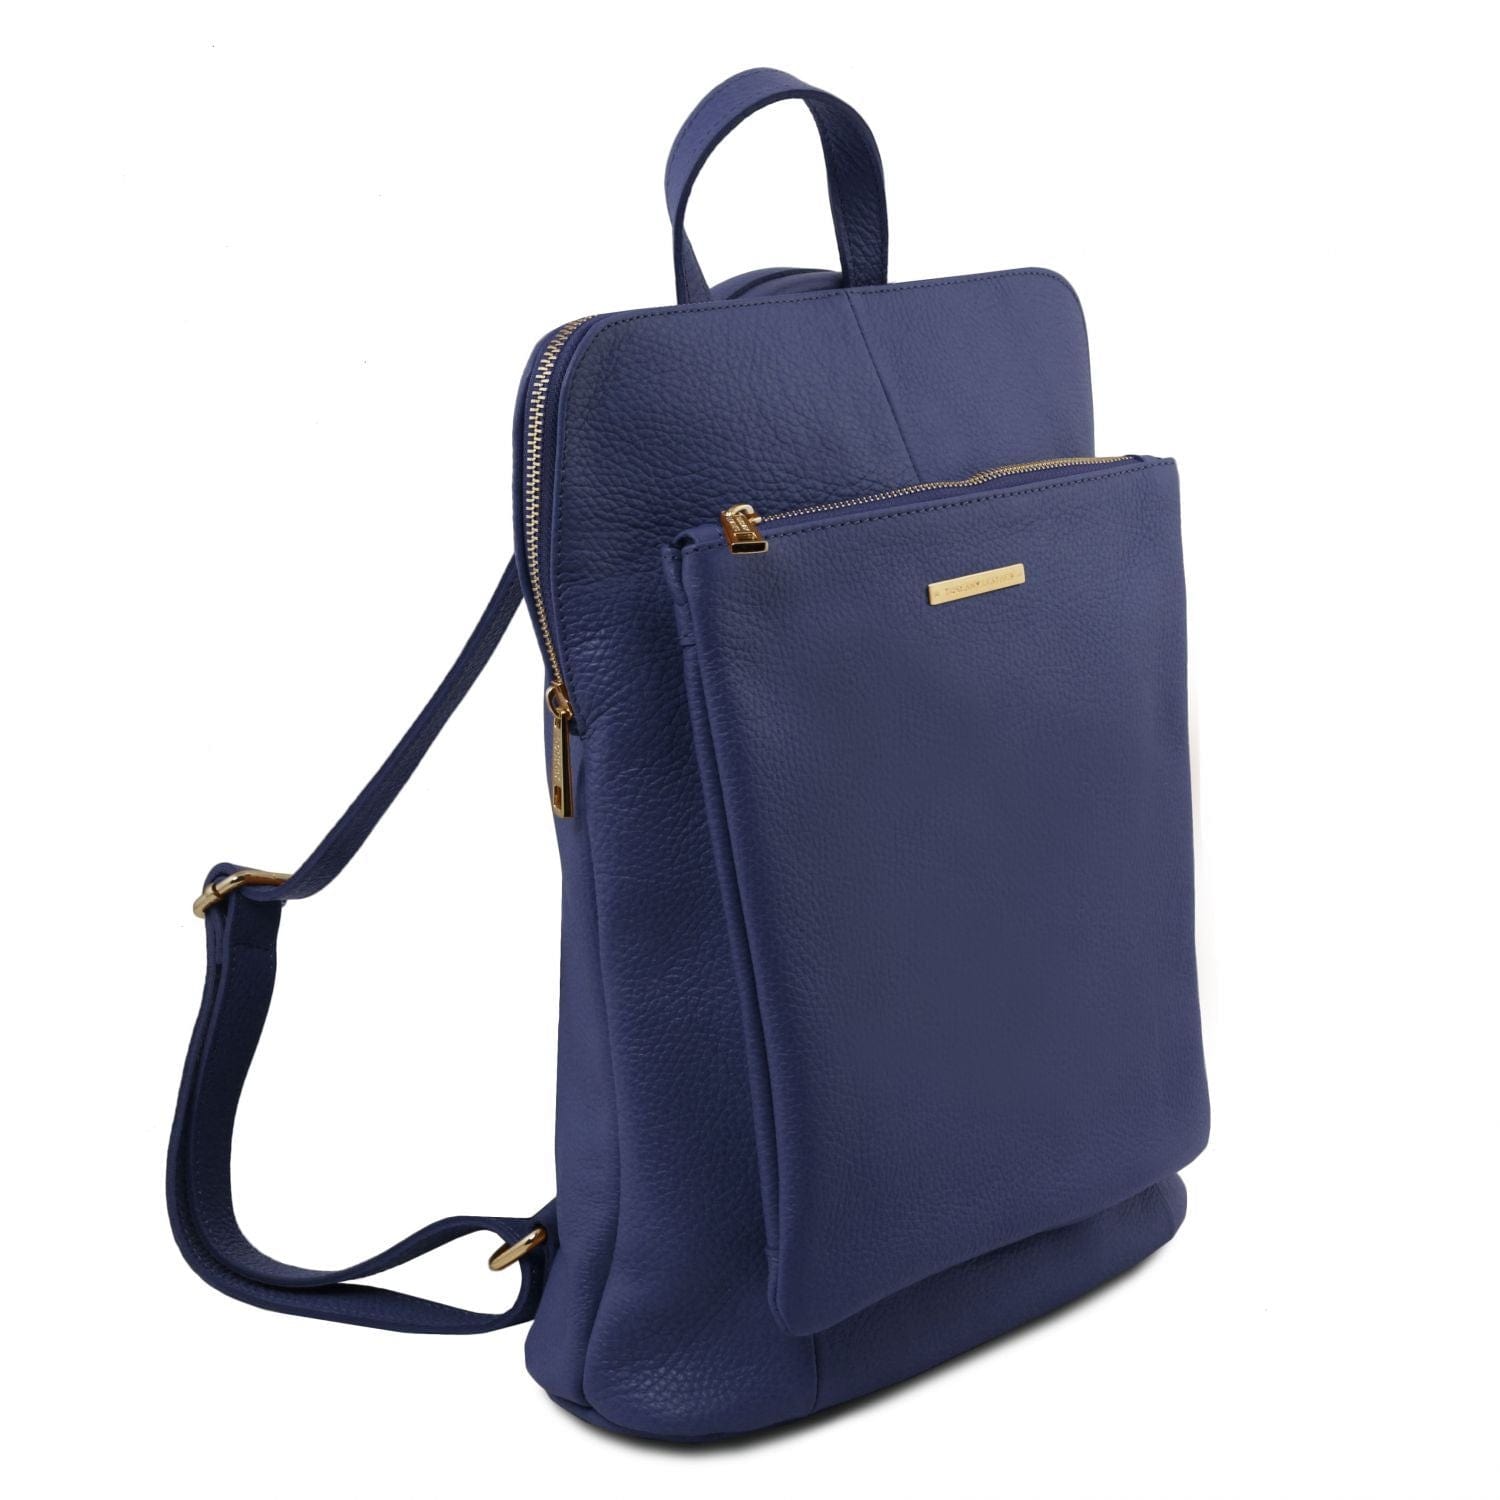 TL Bag - Soft leather backpack for women - 2-in-1 convertible backpack shoulder bag | TL141682 - Premium Leather backpacks for women - Just €142.74! Shop now at San Rocco Italia